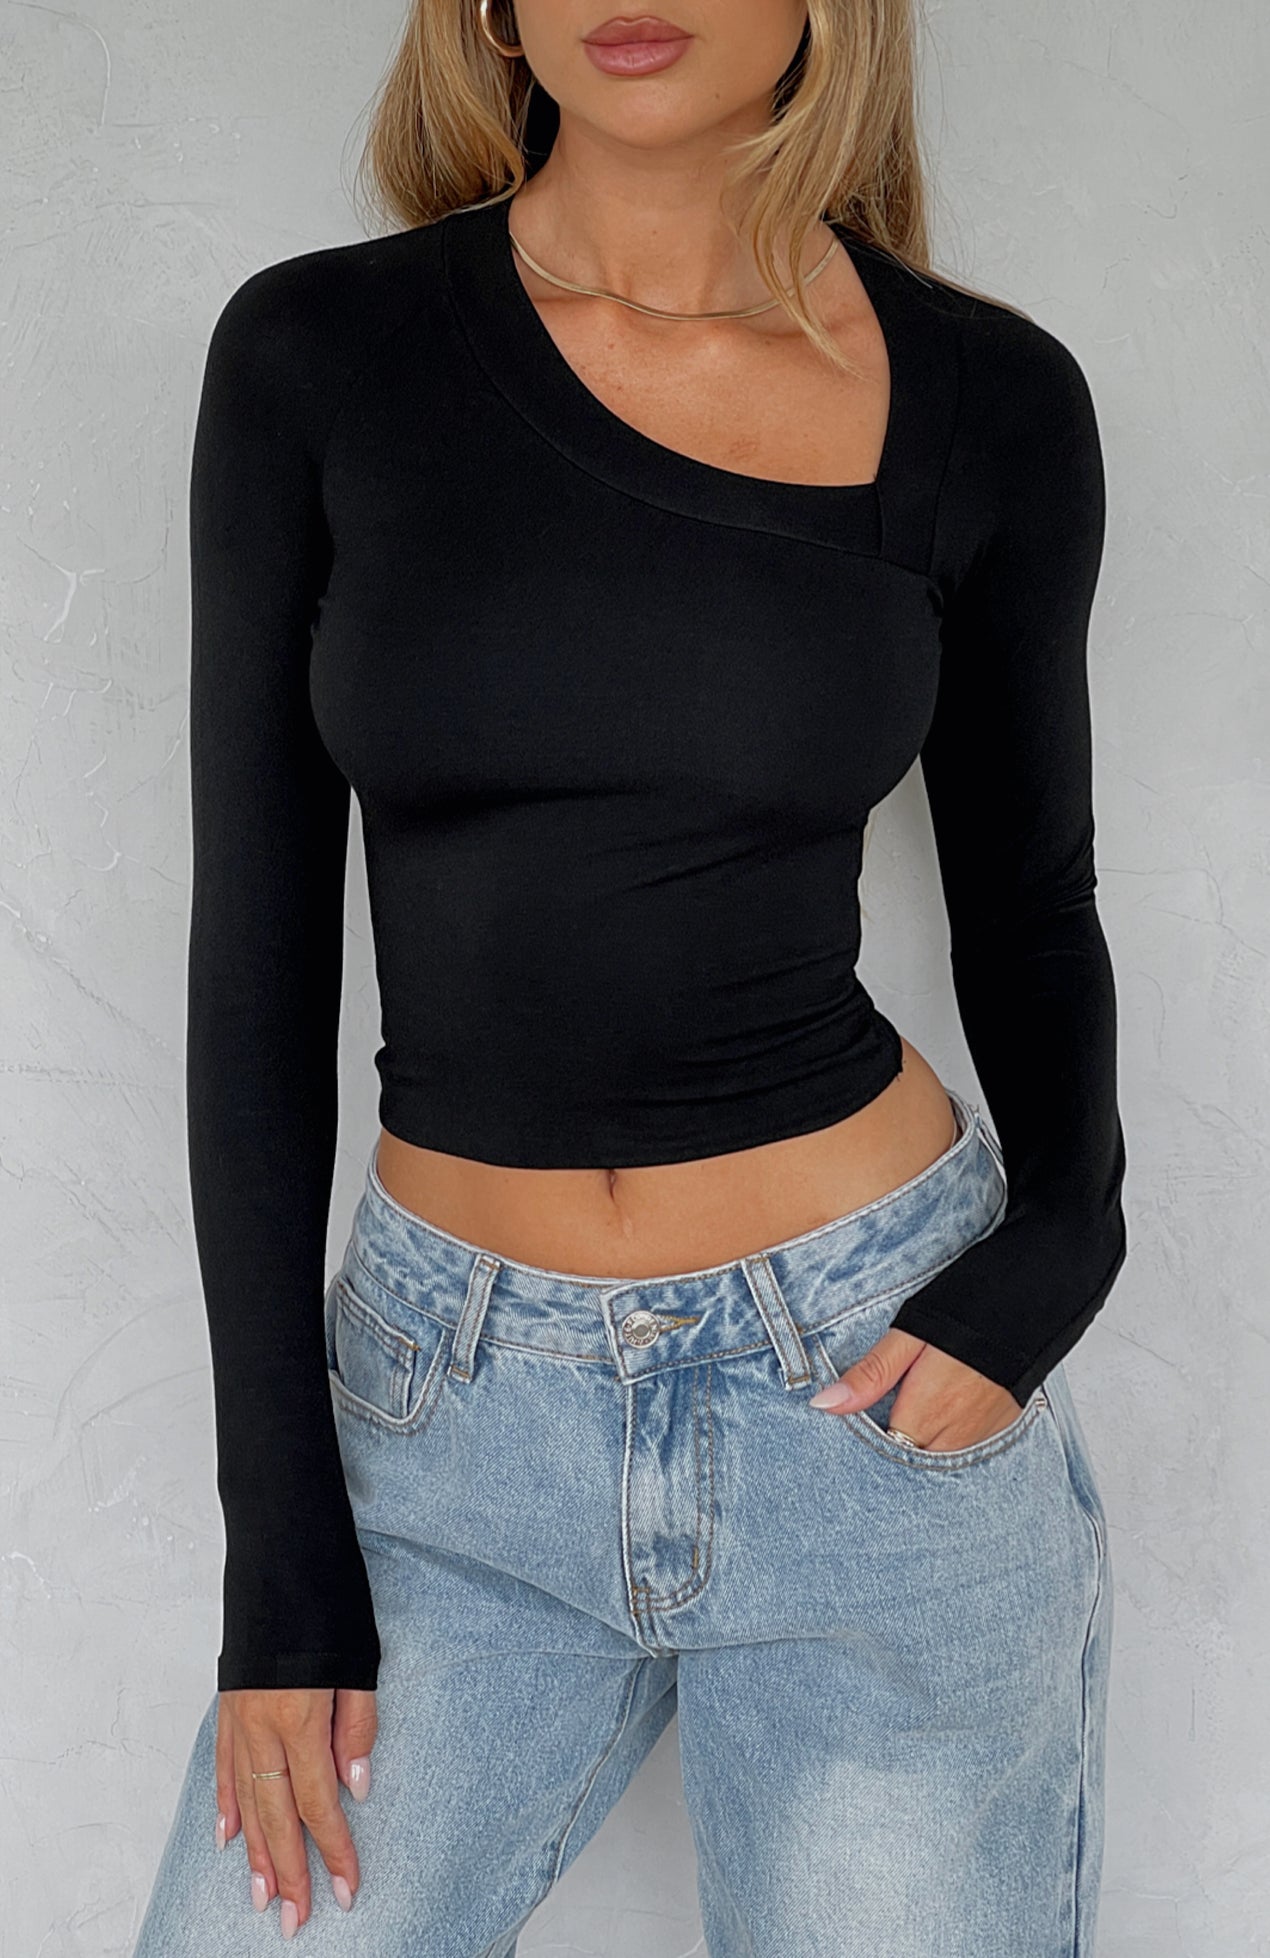 Only For Tonight Long Sleeve Top Black